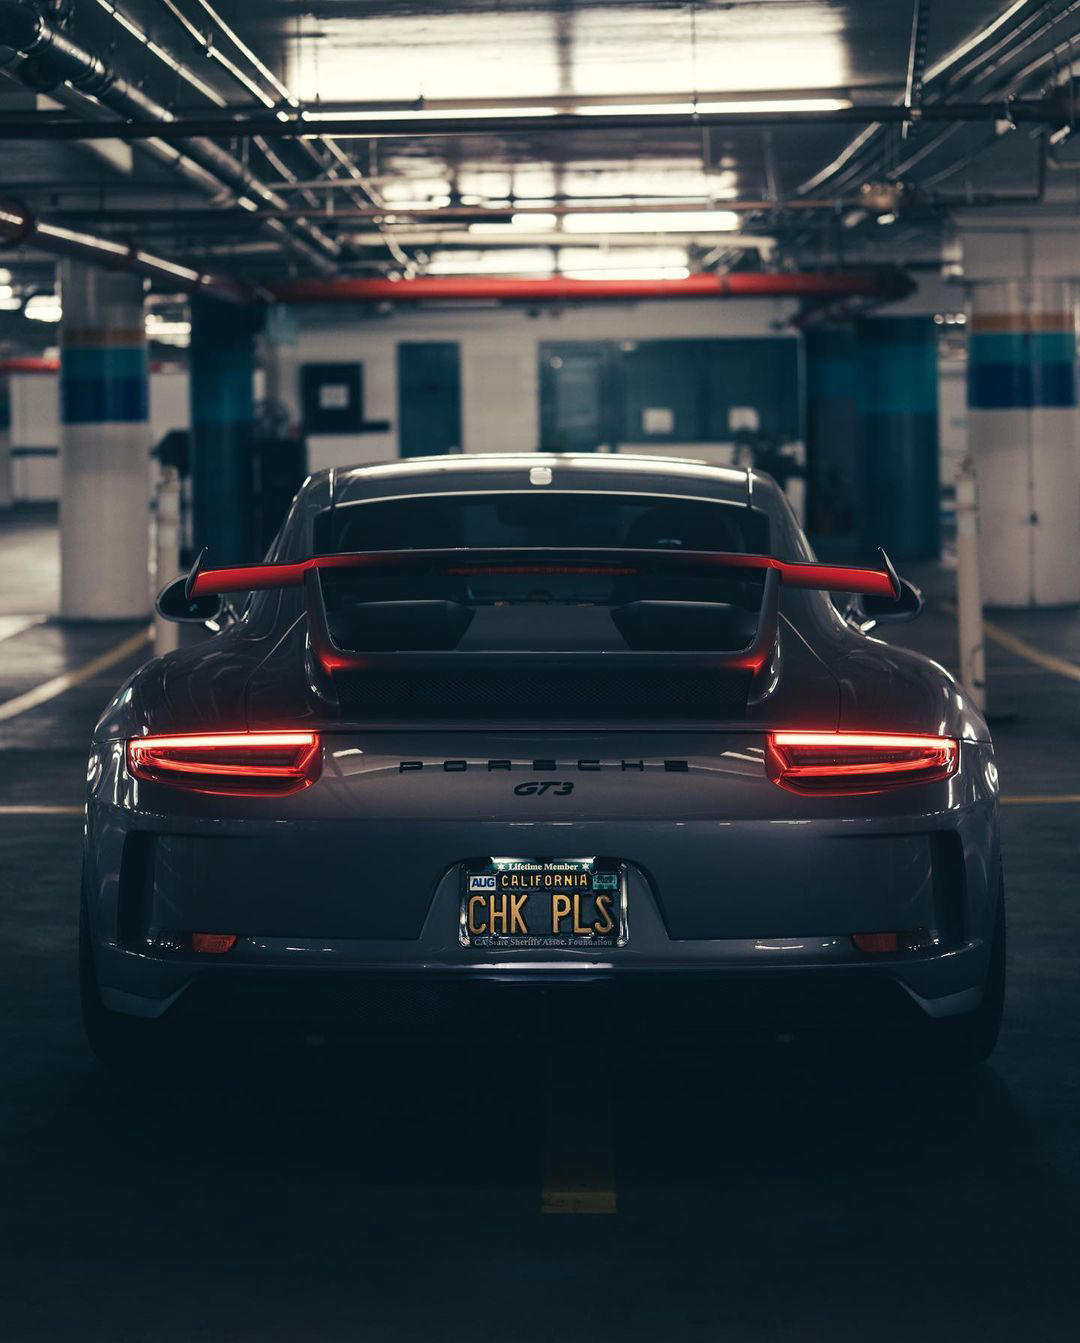 image  1 Porsche - Wings spread, eyes lit, muscles flexed – ready to roll into the night